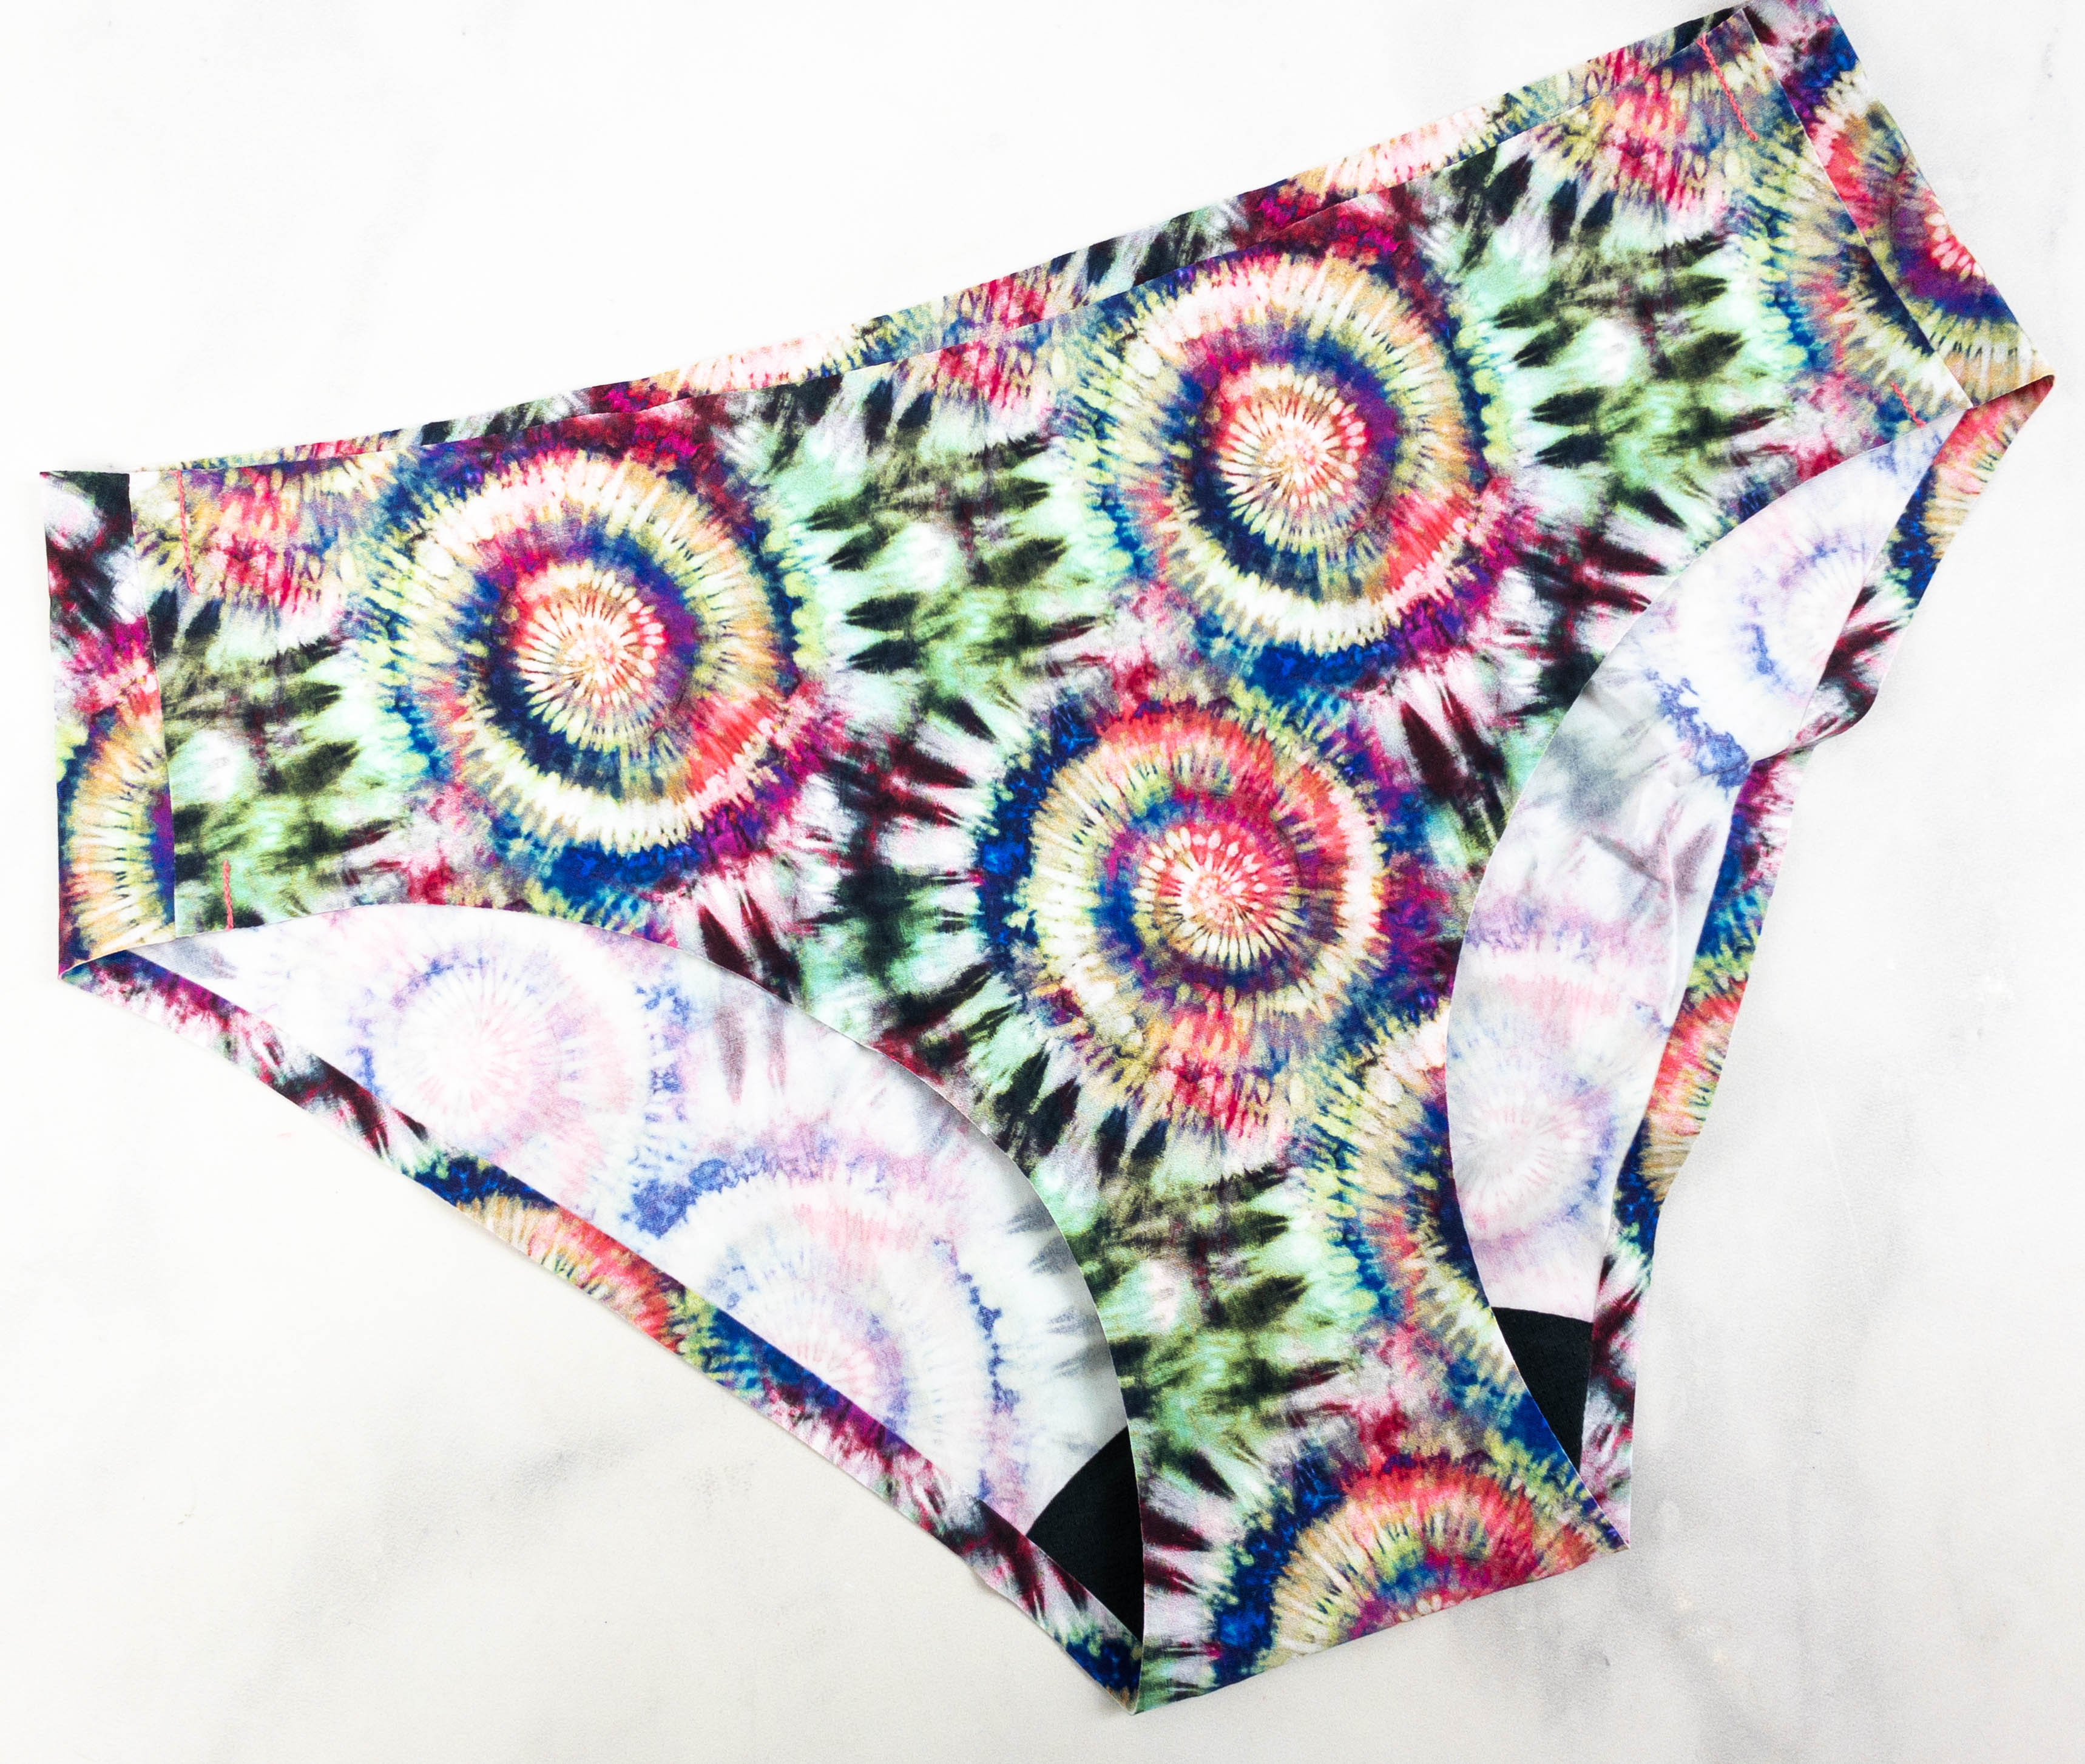 KT by Knix Period Underwear Review - Hello Subscription